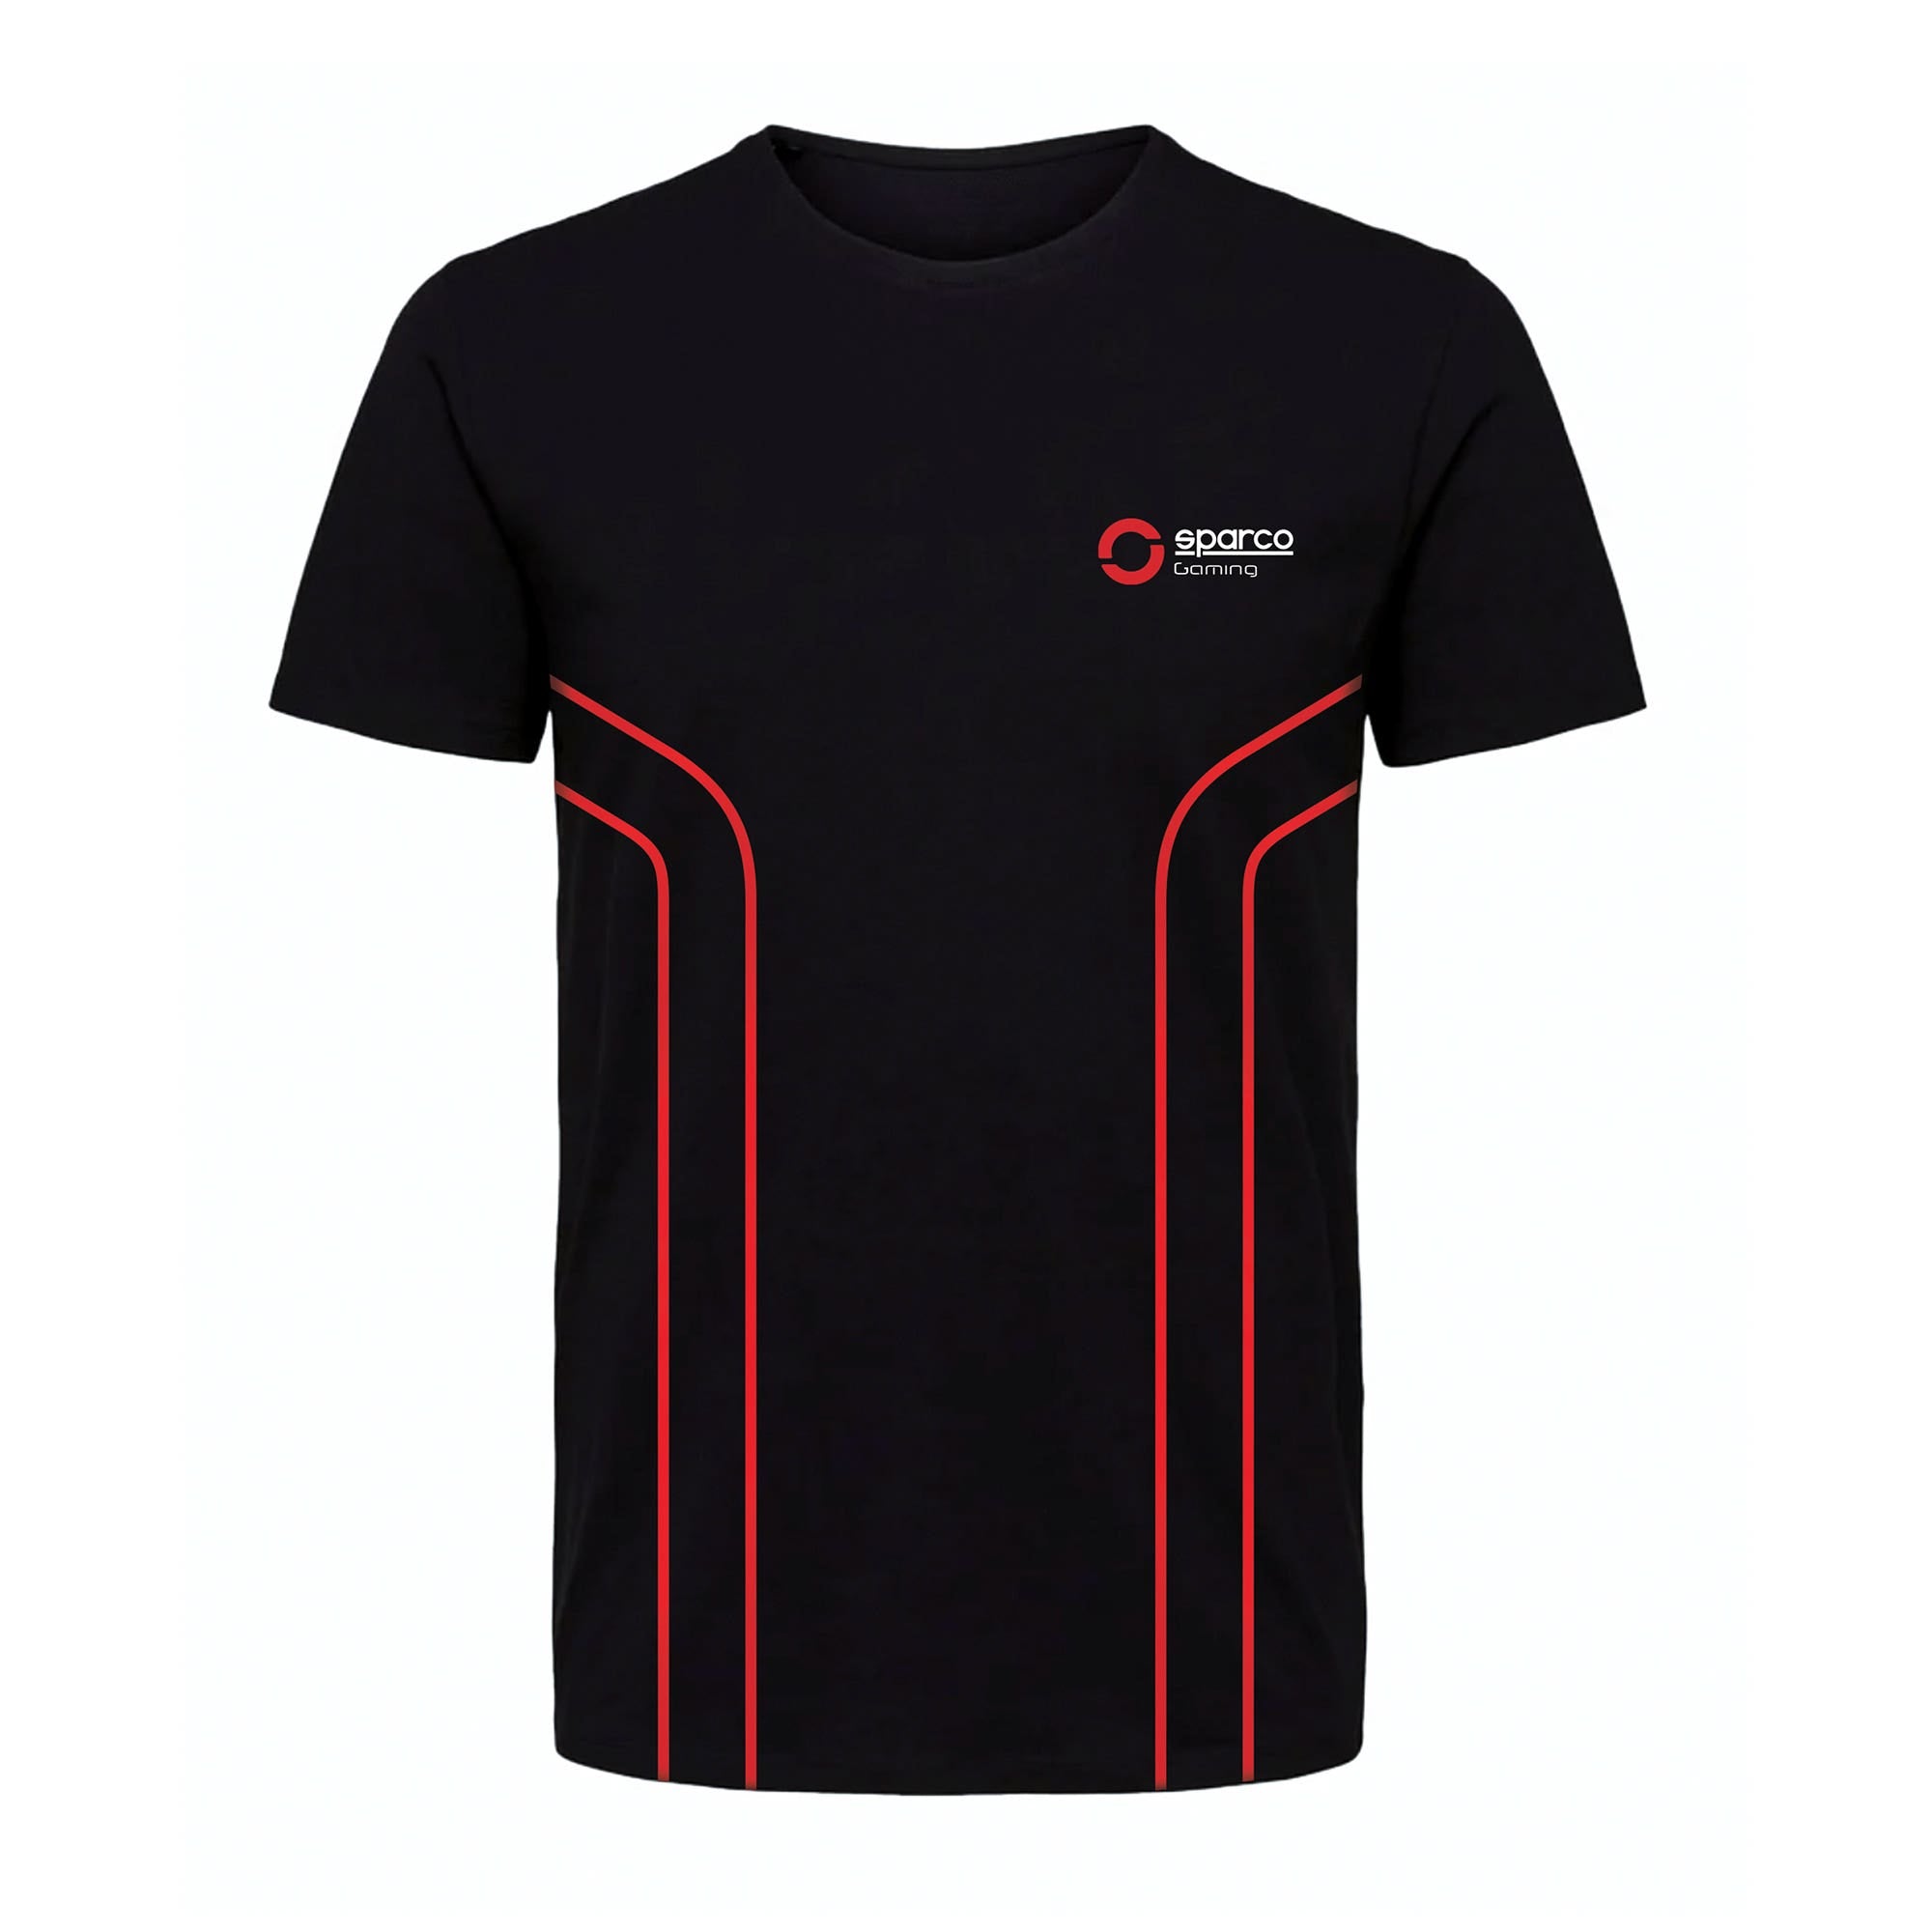 GAMING ROOKIE T-SHIRT - Sparco Shop